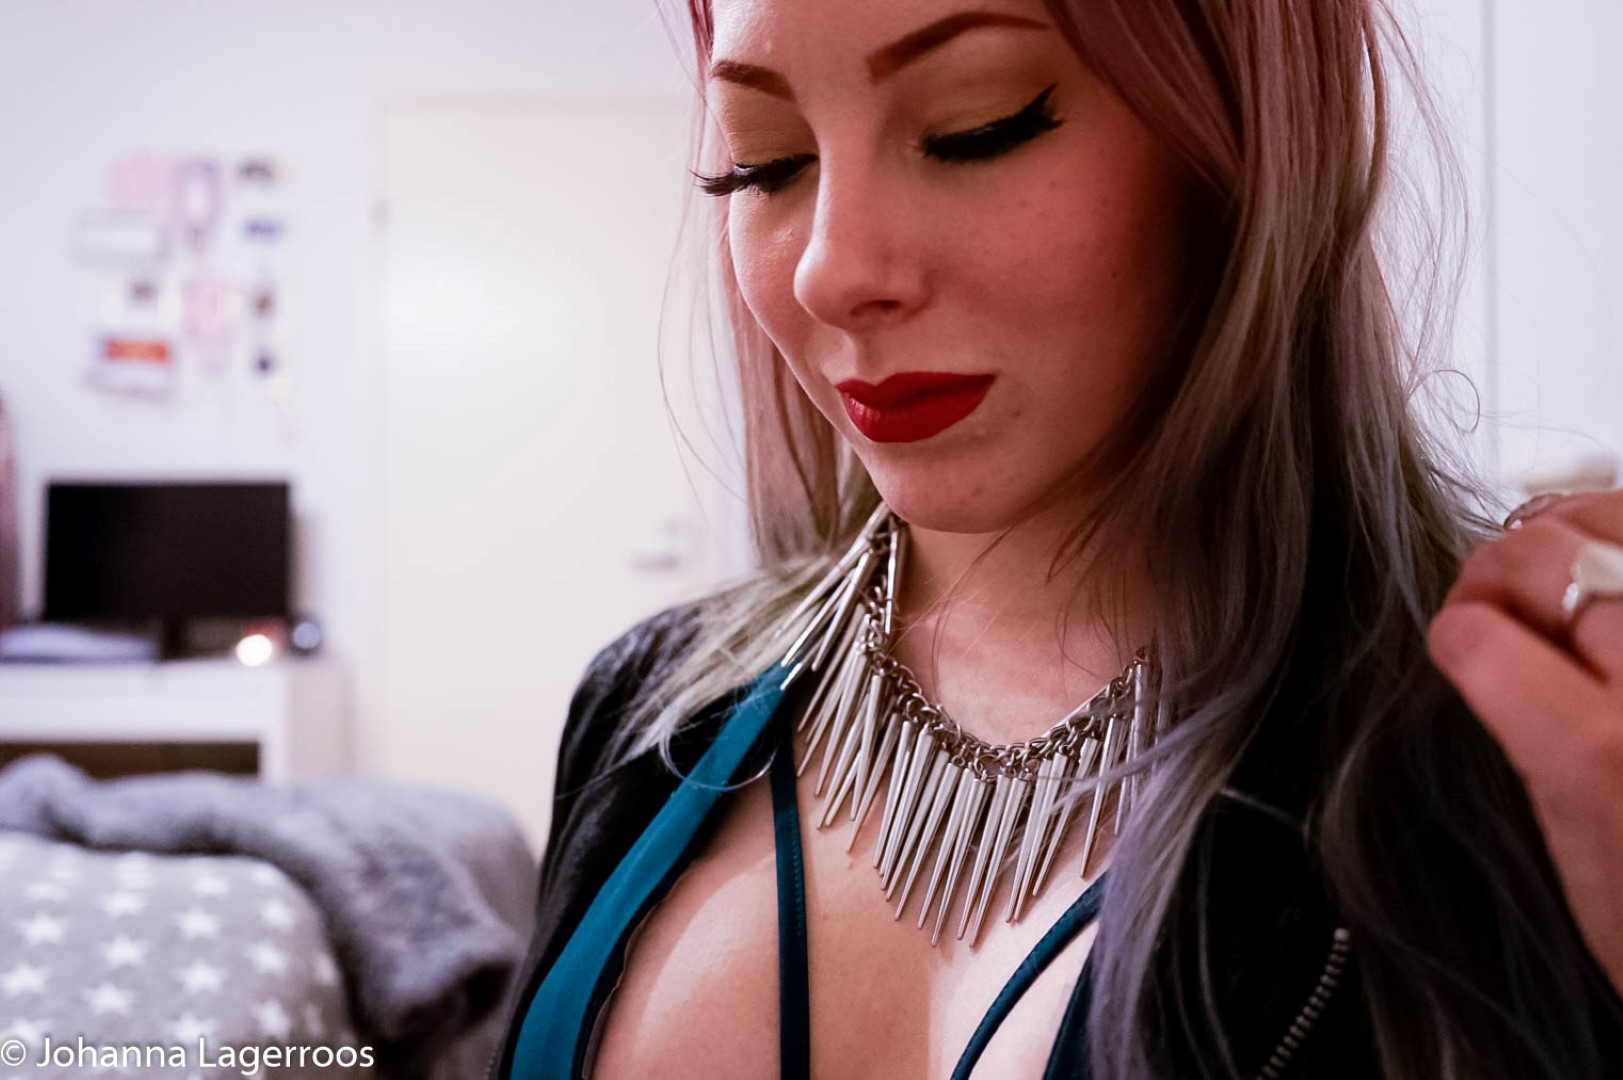 spiked necklace